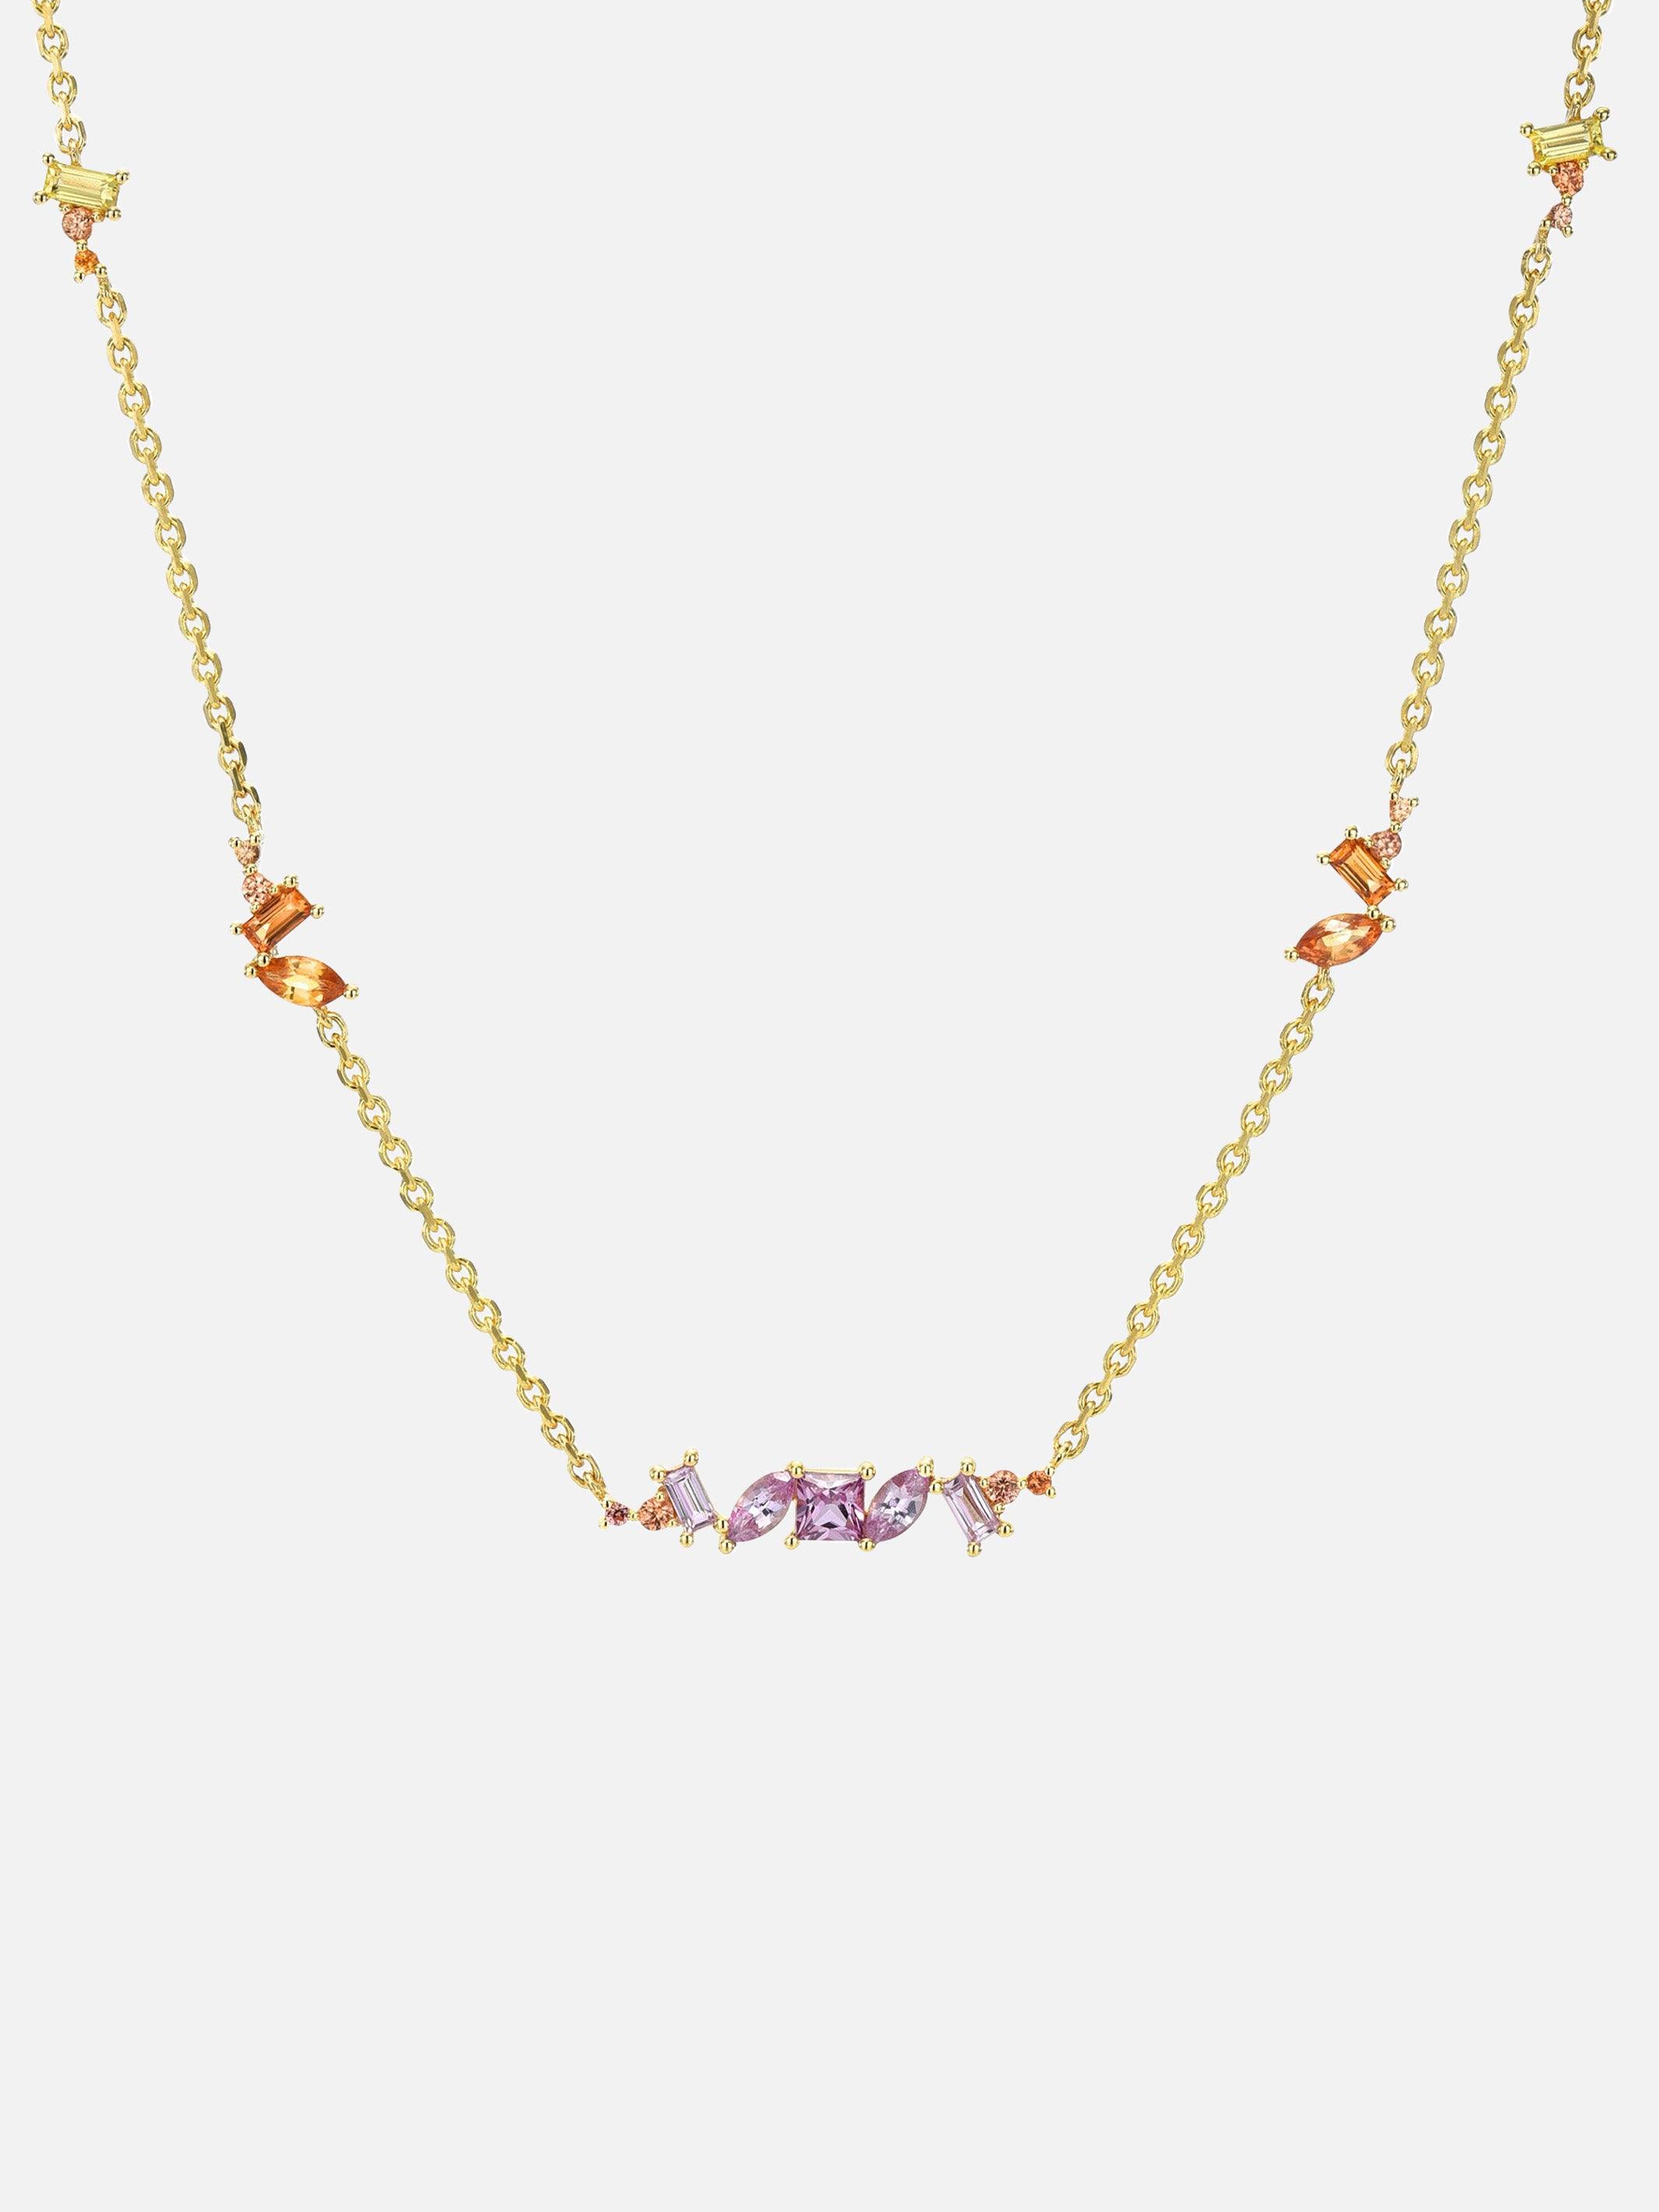 Sunset Luxe Chaos Necklace - Meredith Young - At Present